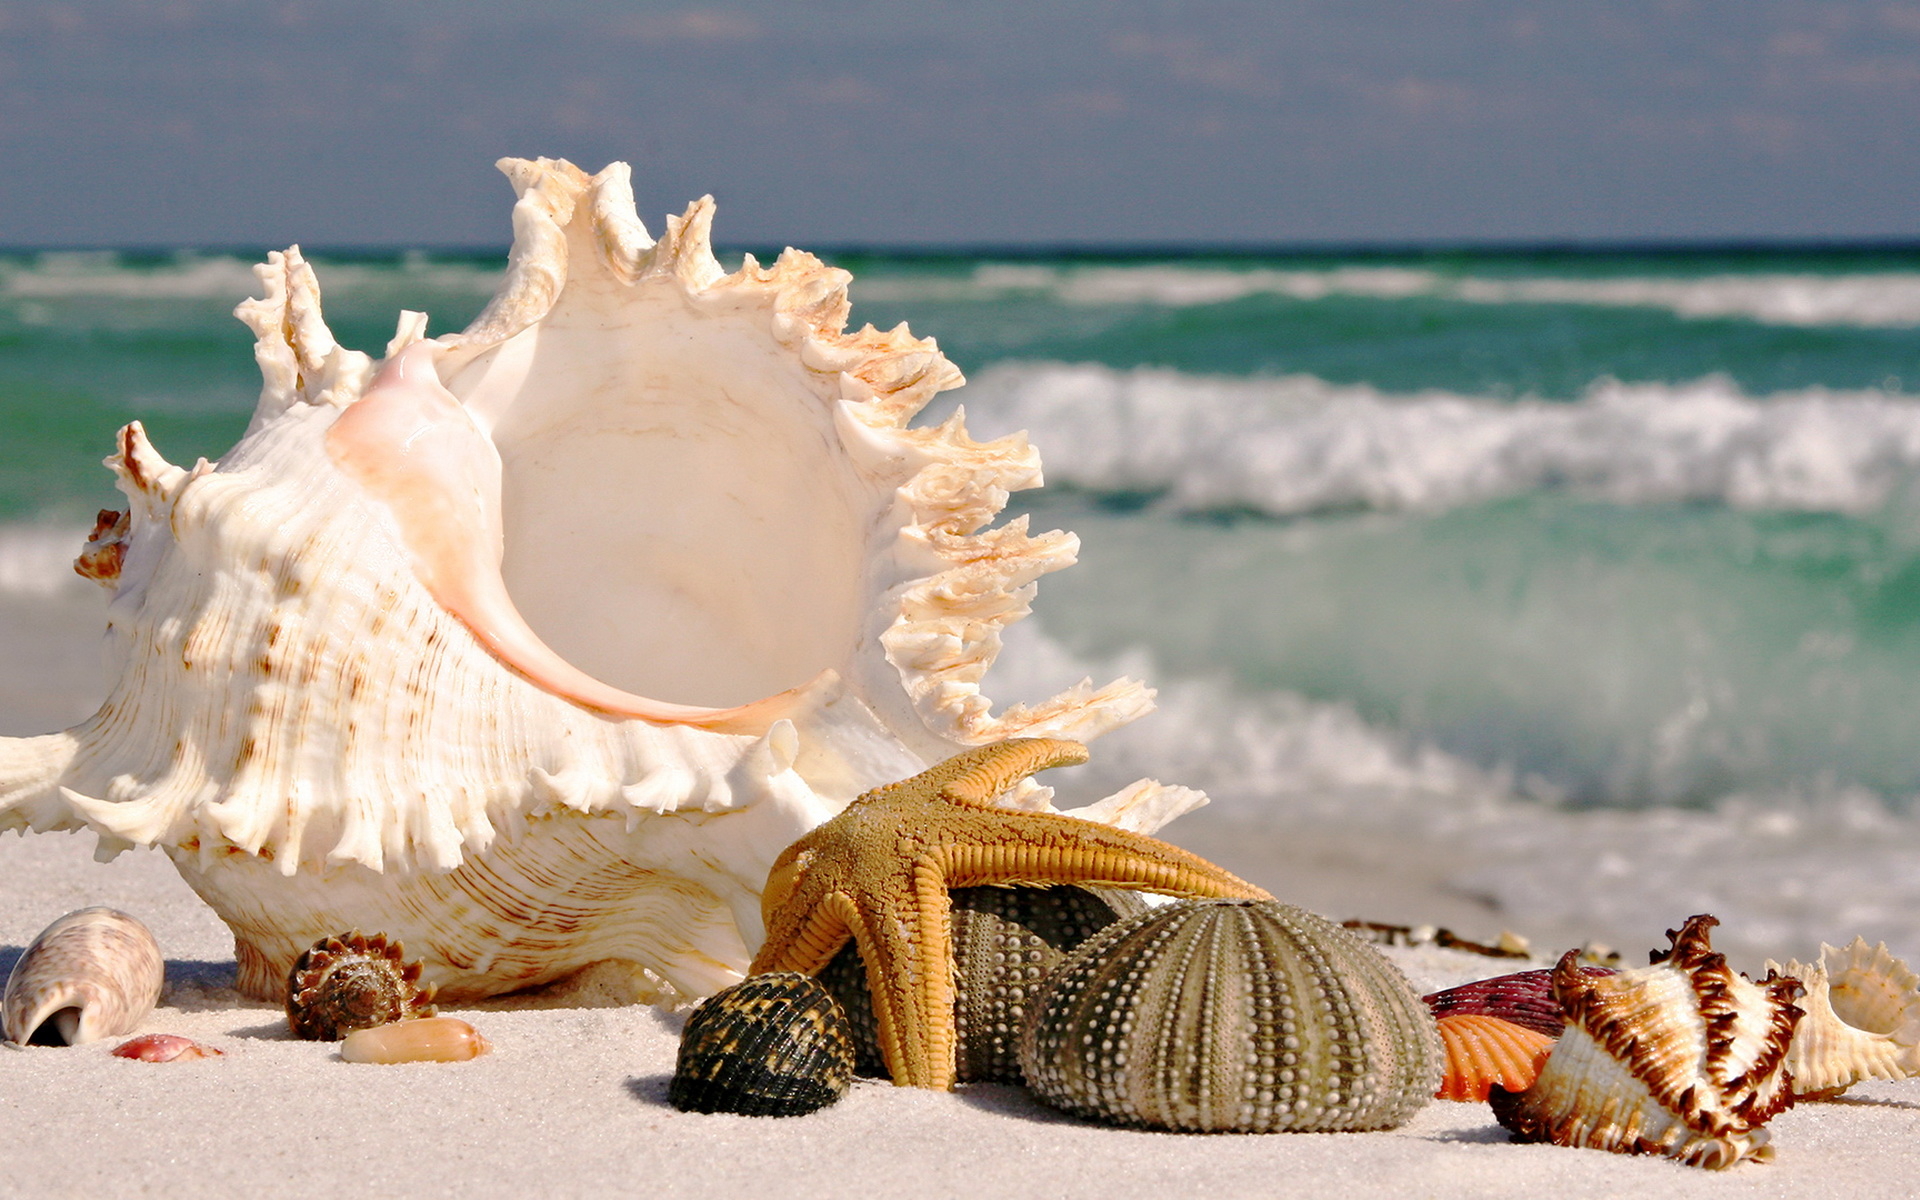 Seashells Wallpaper And Image Pictures Photos